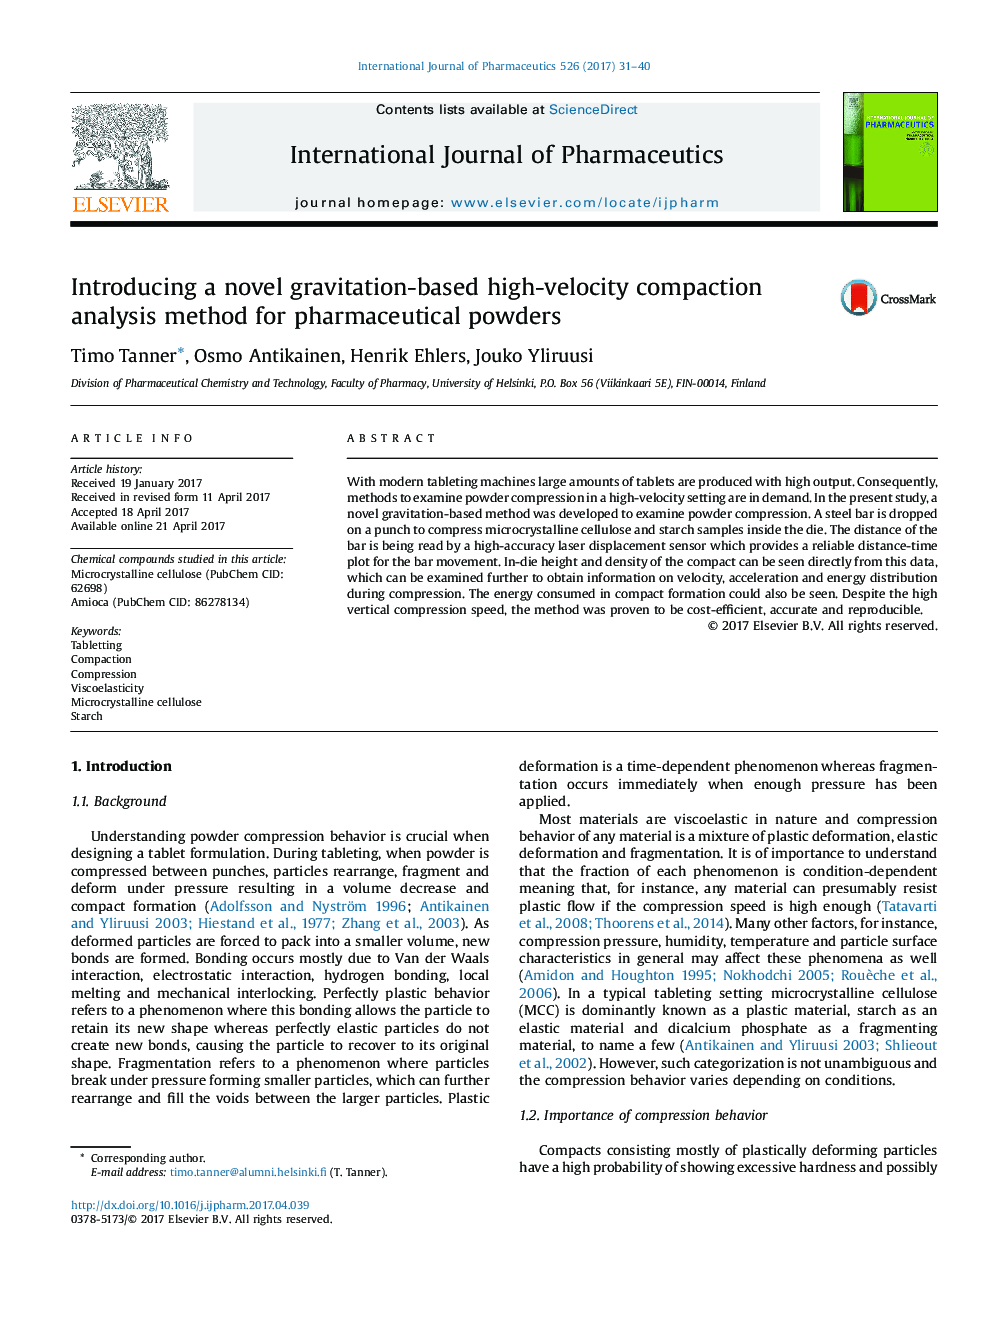 Introducing a novel gravitation-based high-velocity compaction analysis method for pharmaceutical powders